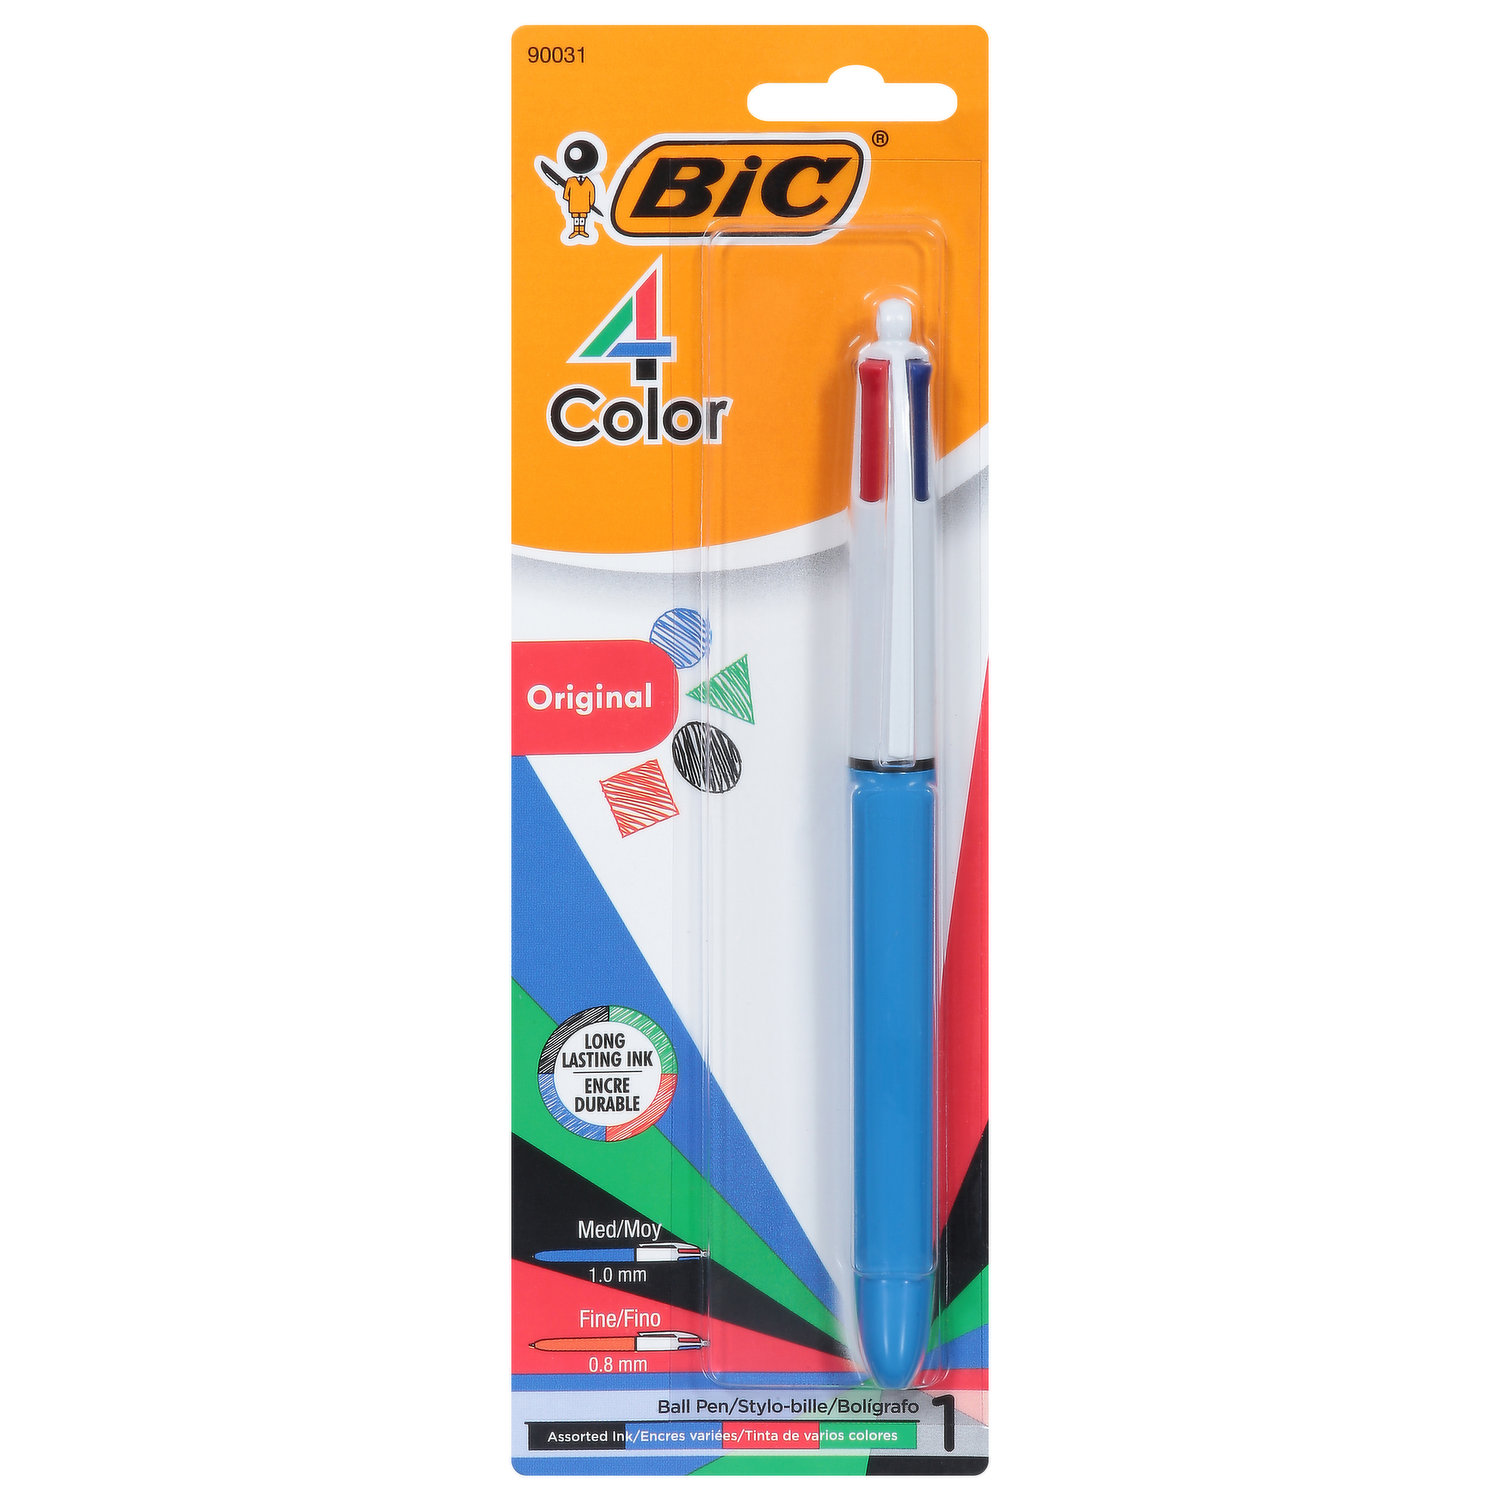 The 4-colour BIC©: a timeless 50-year-old pen! - Plastics le Mag